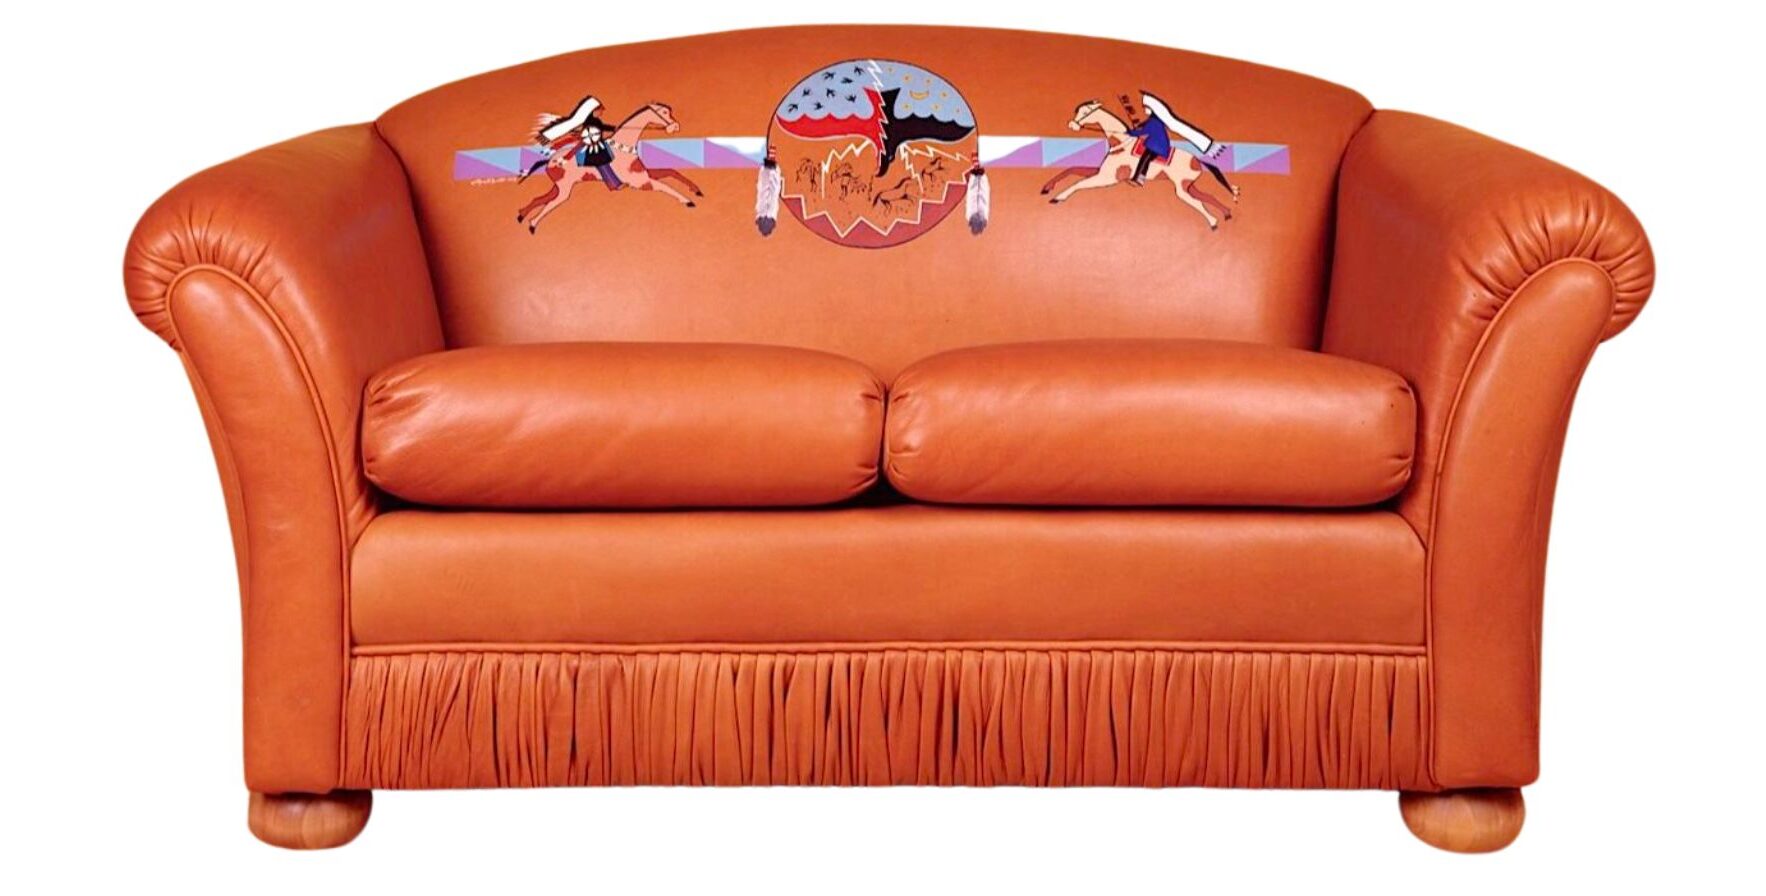 Leather love seat with gathered kick plate and painted Native American art on seat back